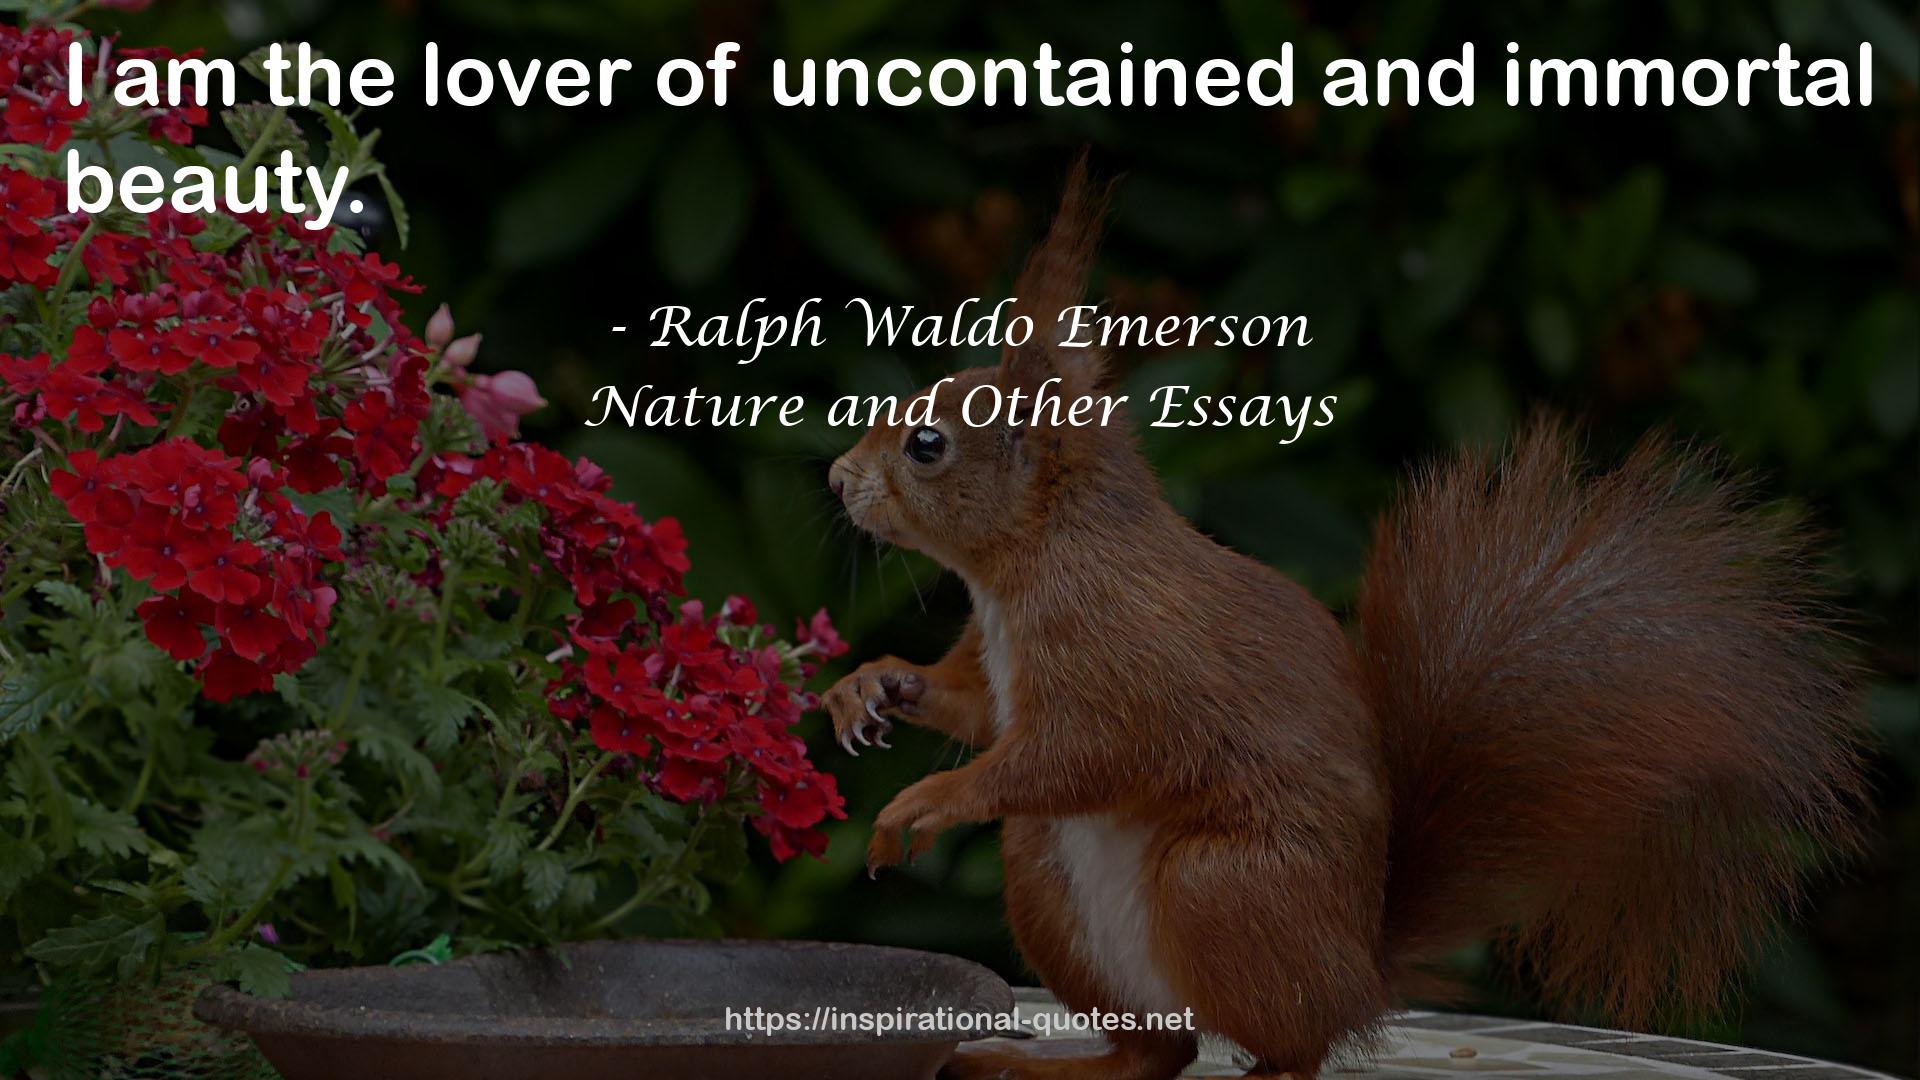 Nature and Other Essays QUOTES